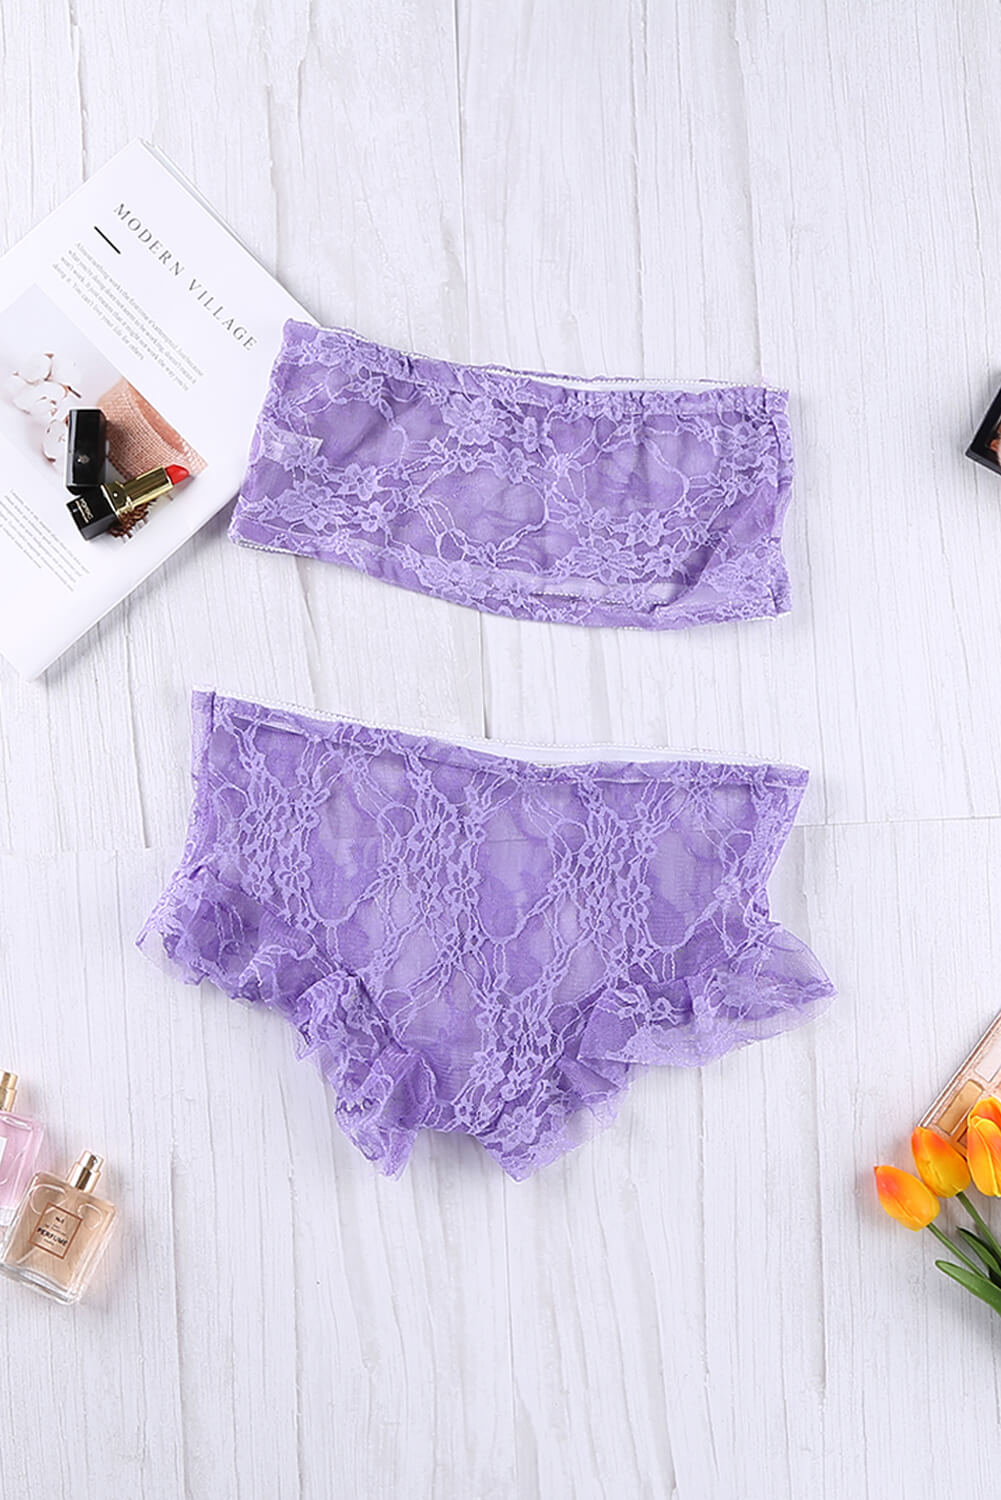 Purple Lace Mesh Tube See Through Strapless Lingerie Set